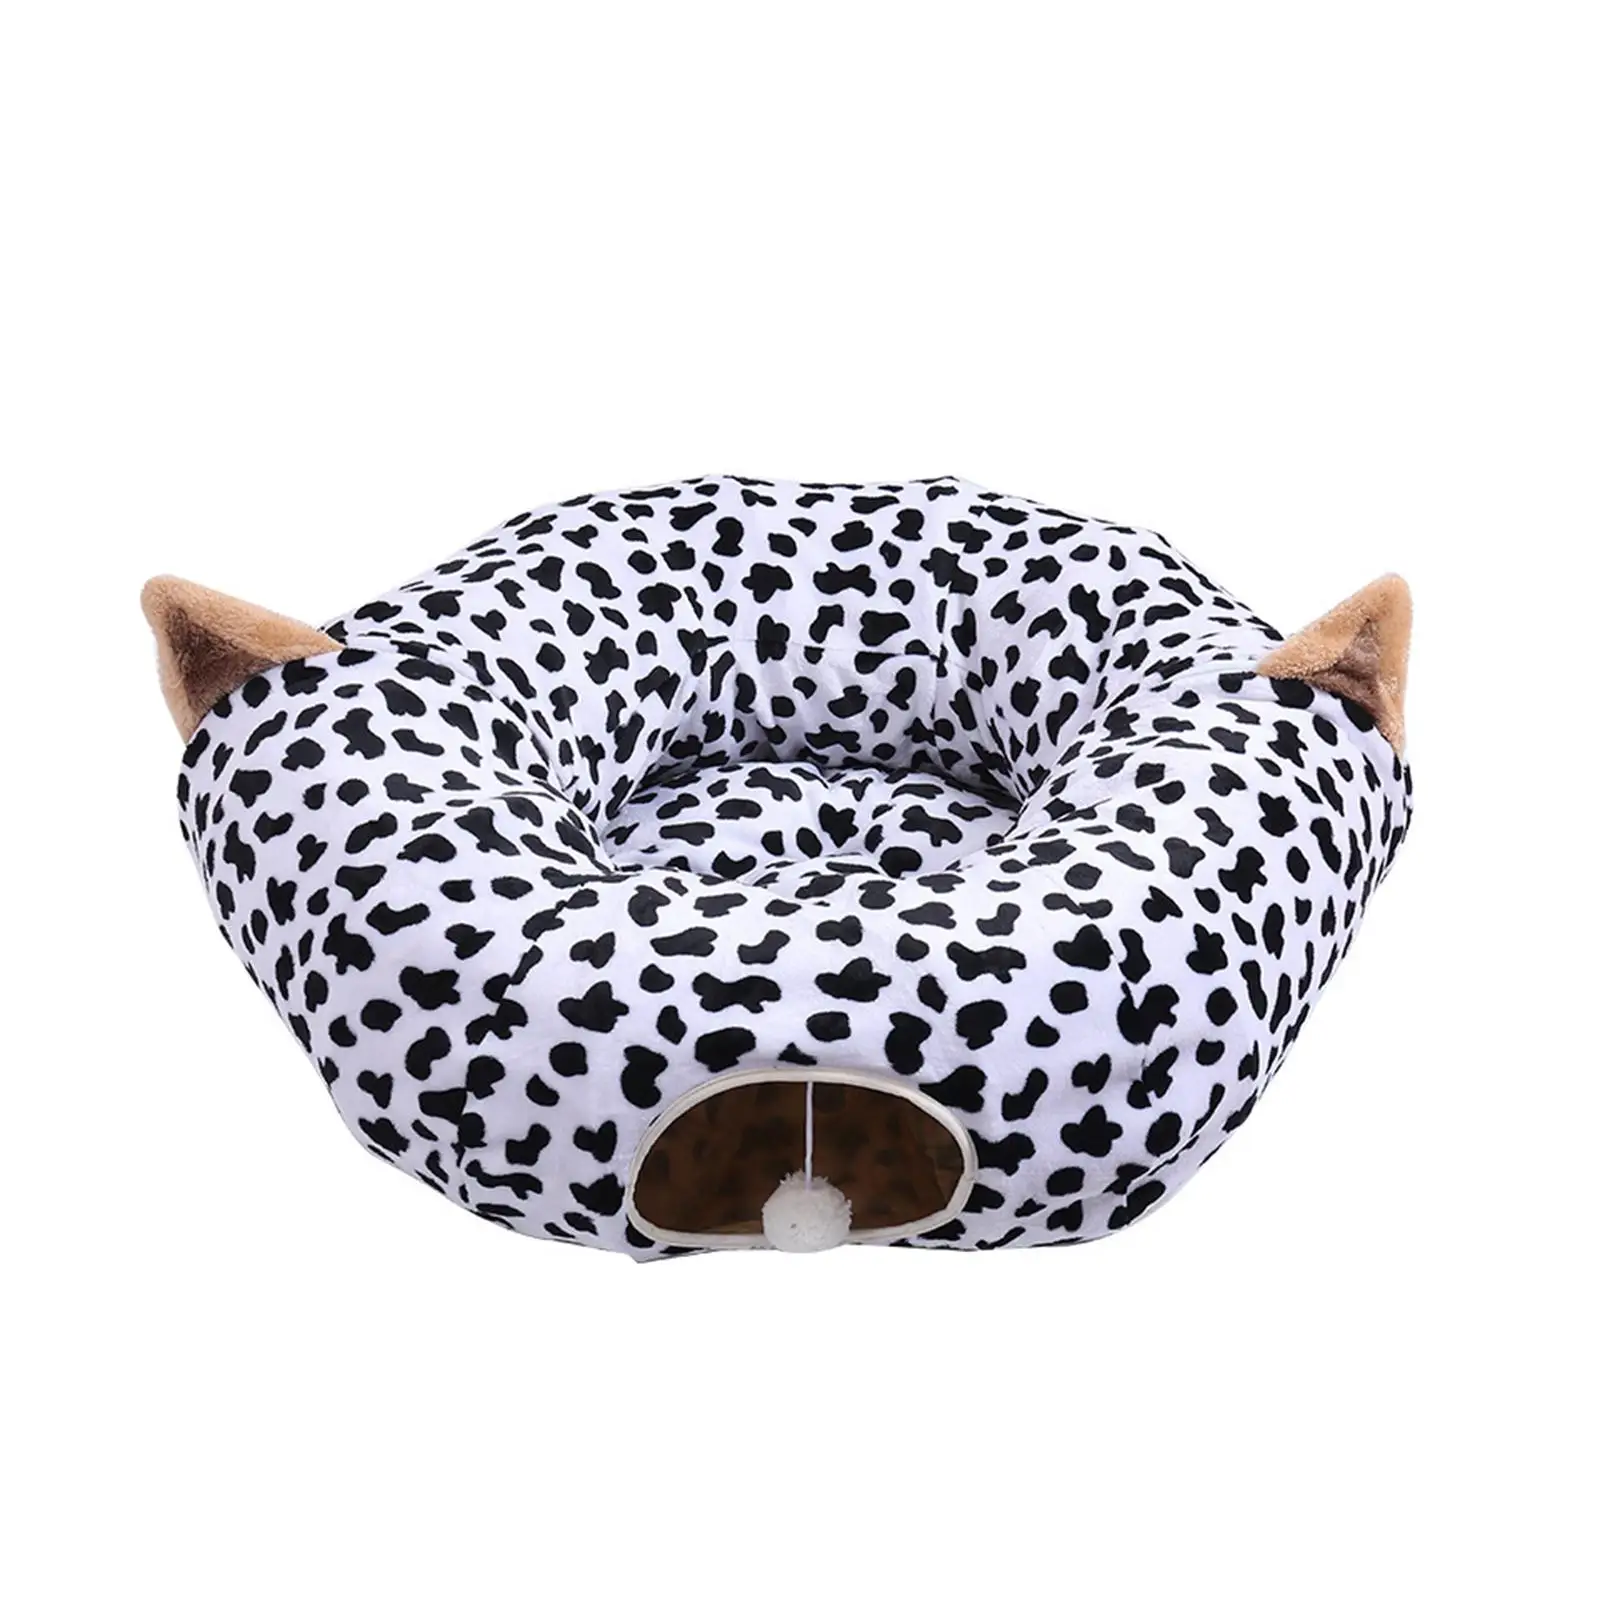 Fun Tunnel Tube Pet Supplies Interactive Rolling Detachable Cats for Dogs